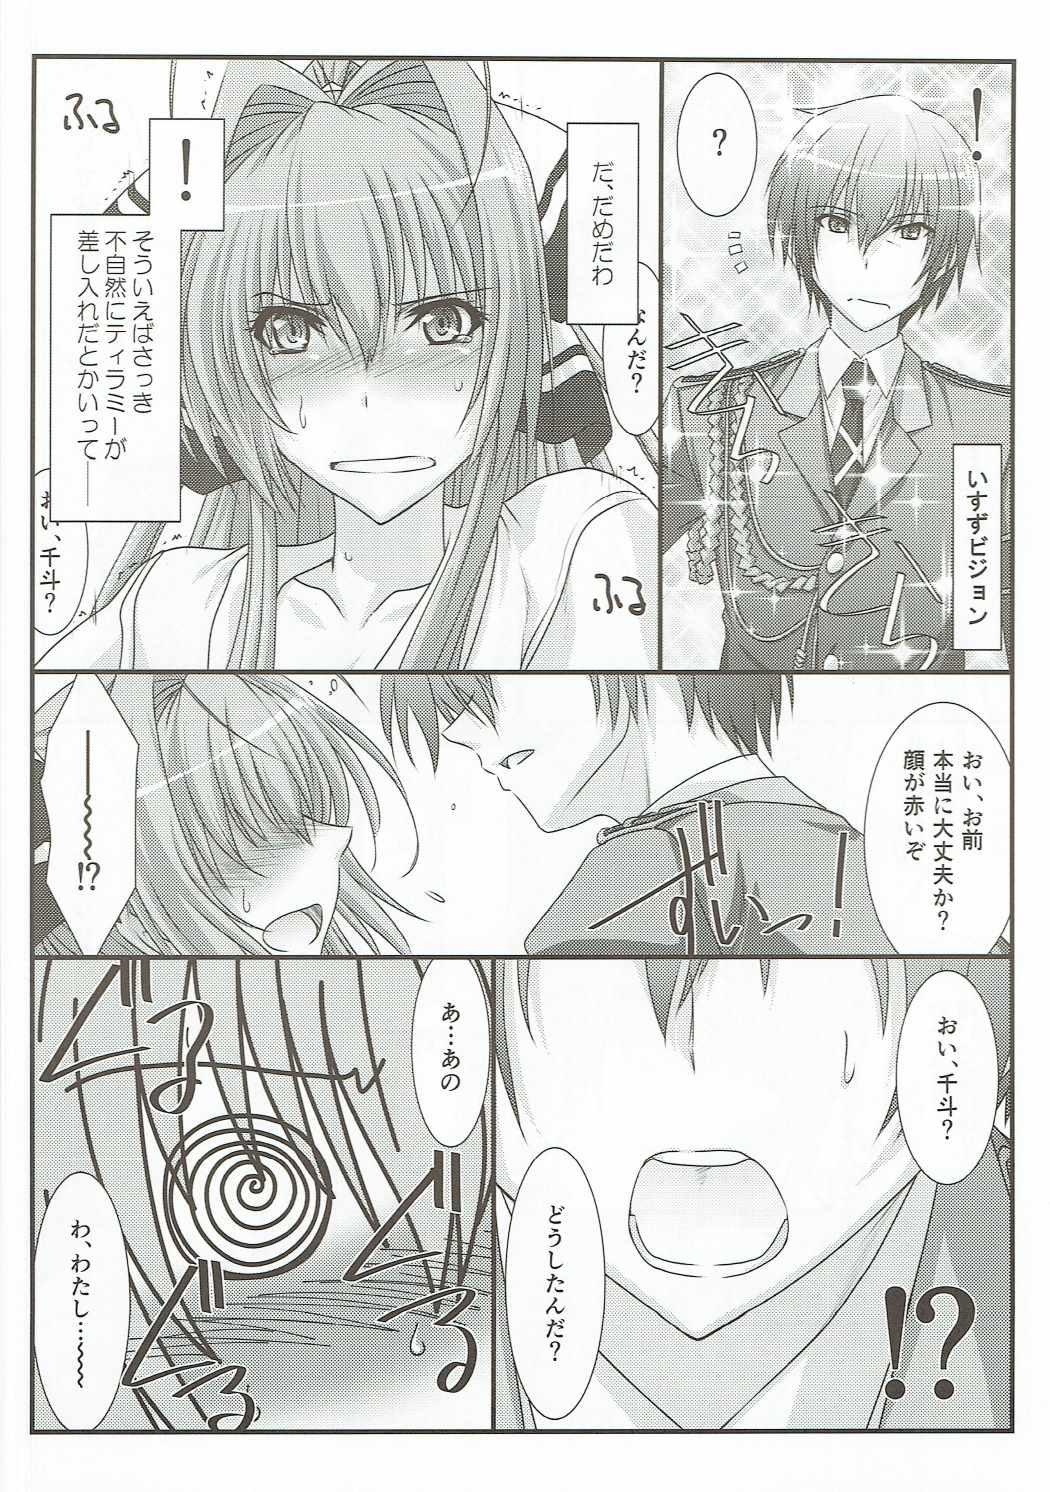 Thai Astral Bout Ver.34 - Amagi brilliant park Watersports - Page 7